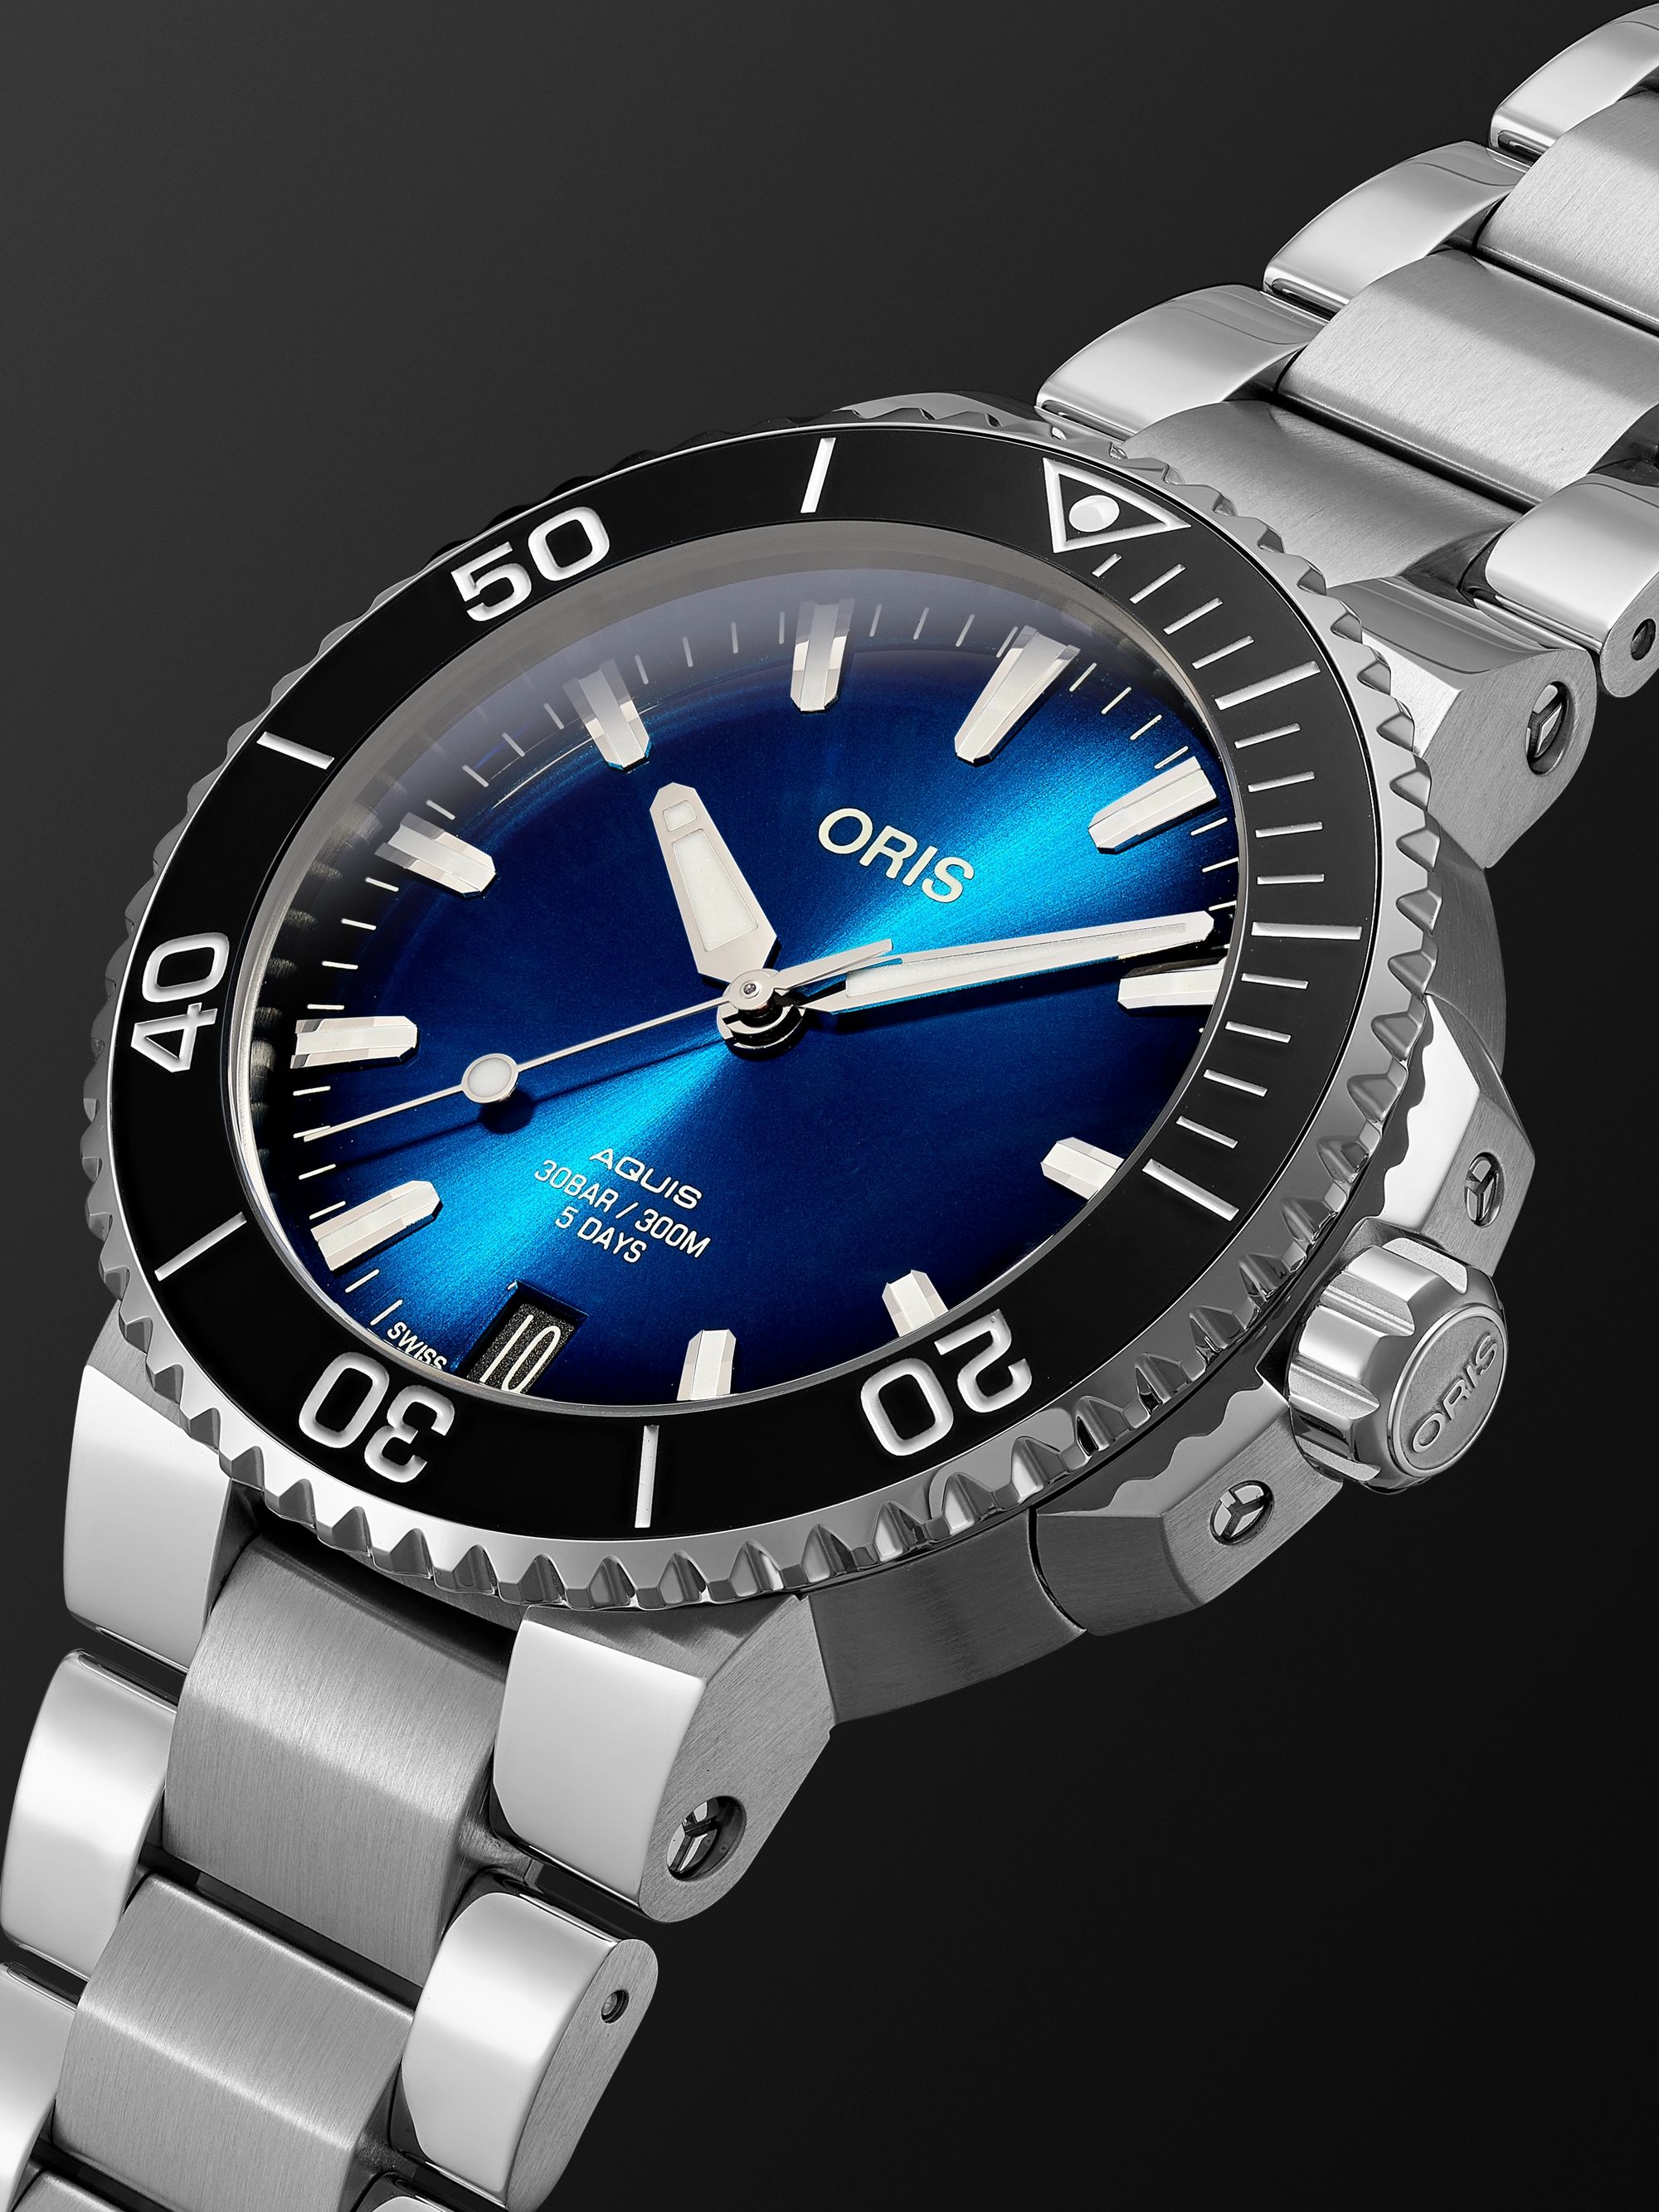 ORIS Aquis Date Calibre 400 Automatic 41.5mm Stainless Steel Watch, Ref. No. 01 400 7769 4135-07 8 22 09PEB